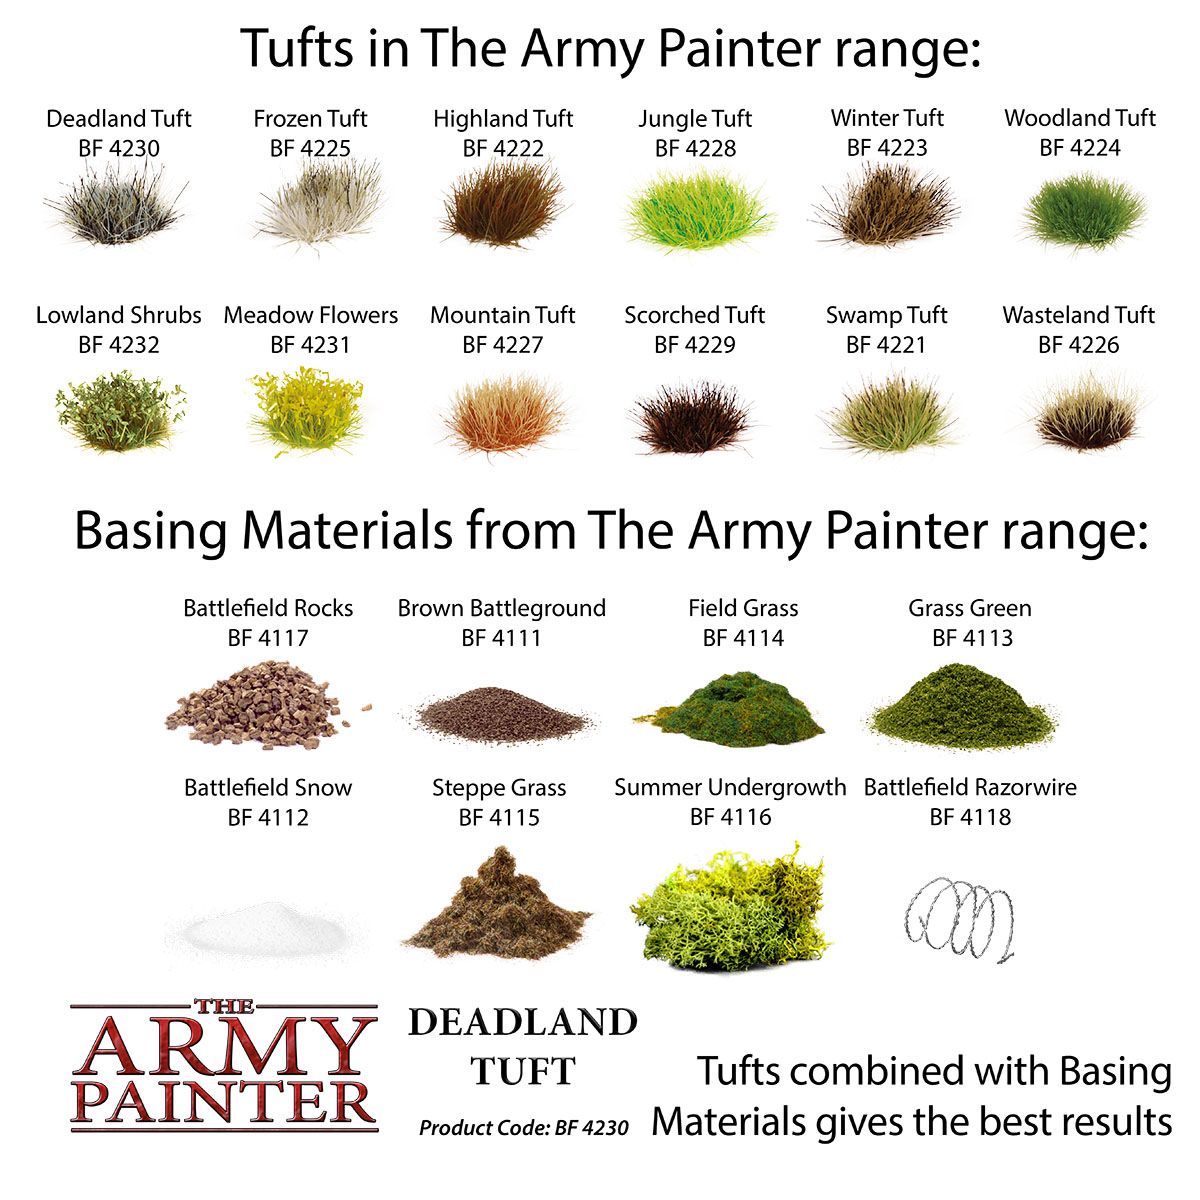 Deadland Tufts (The Army Painter)